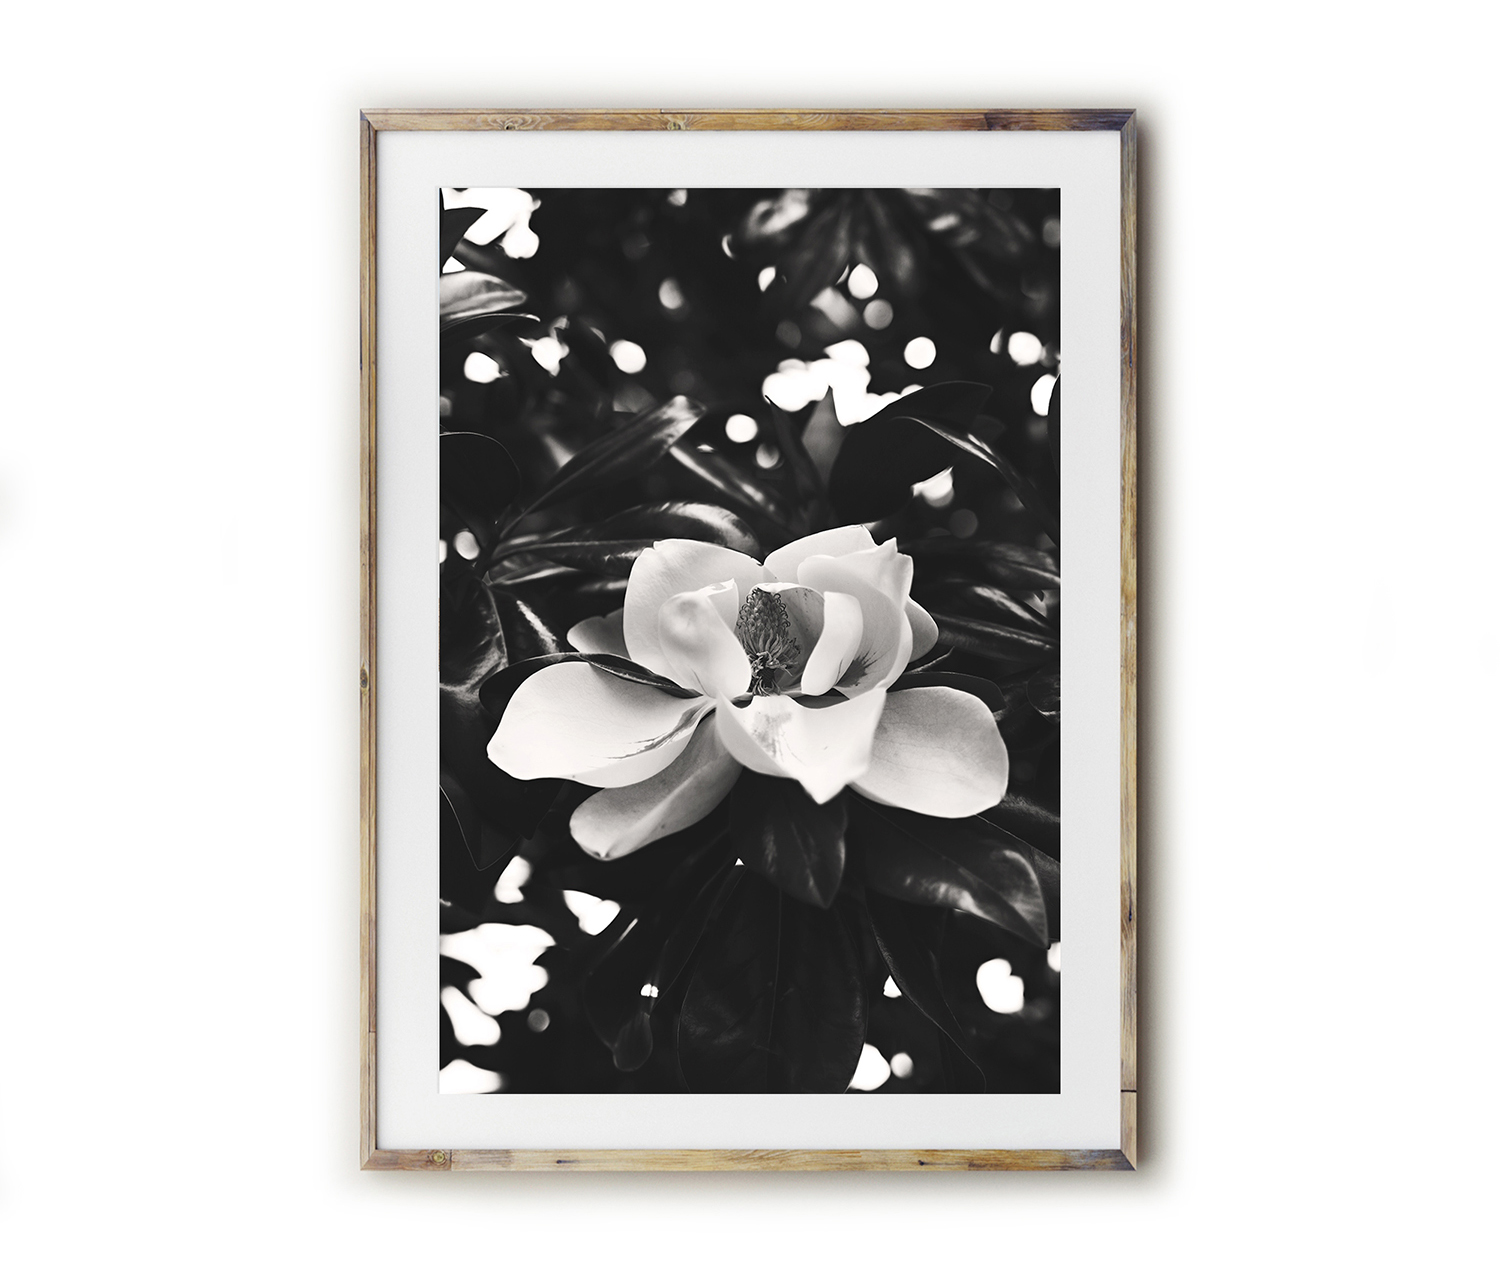 Fine art for the Southern home! Beautiful photography and typography prints created by Kara Layne now available to purchase from the Kara Layne Shop. Come and browse the collection and find something you love and enjoy it in your own home! #WallArtIdeas #ScenesOfTheSouth #SoutherLiving #ModernFarmhouseDecorIdeas #FineArtPrints #Magnolia #MagnoliaTree #MagnoliaBloom